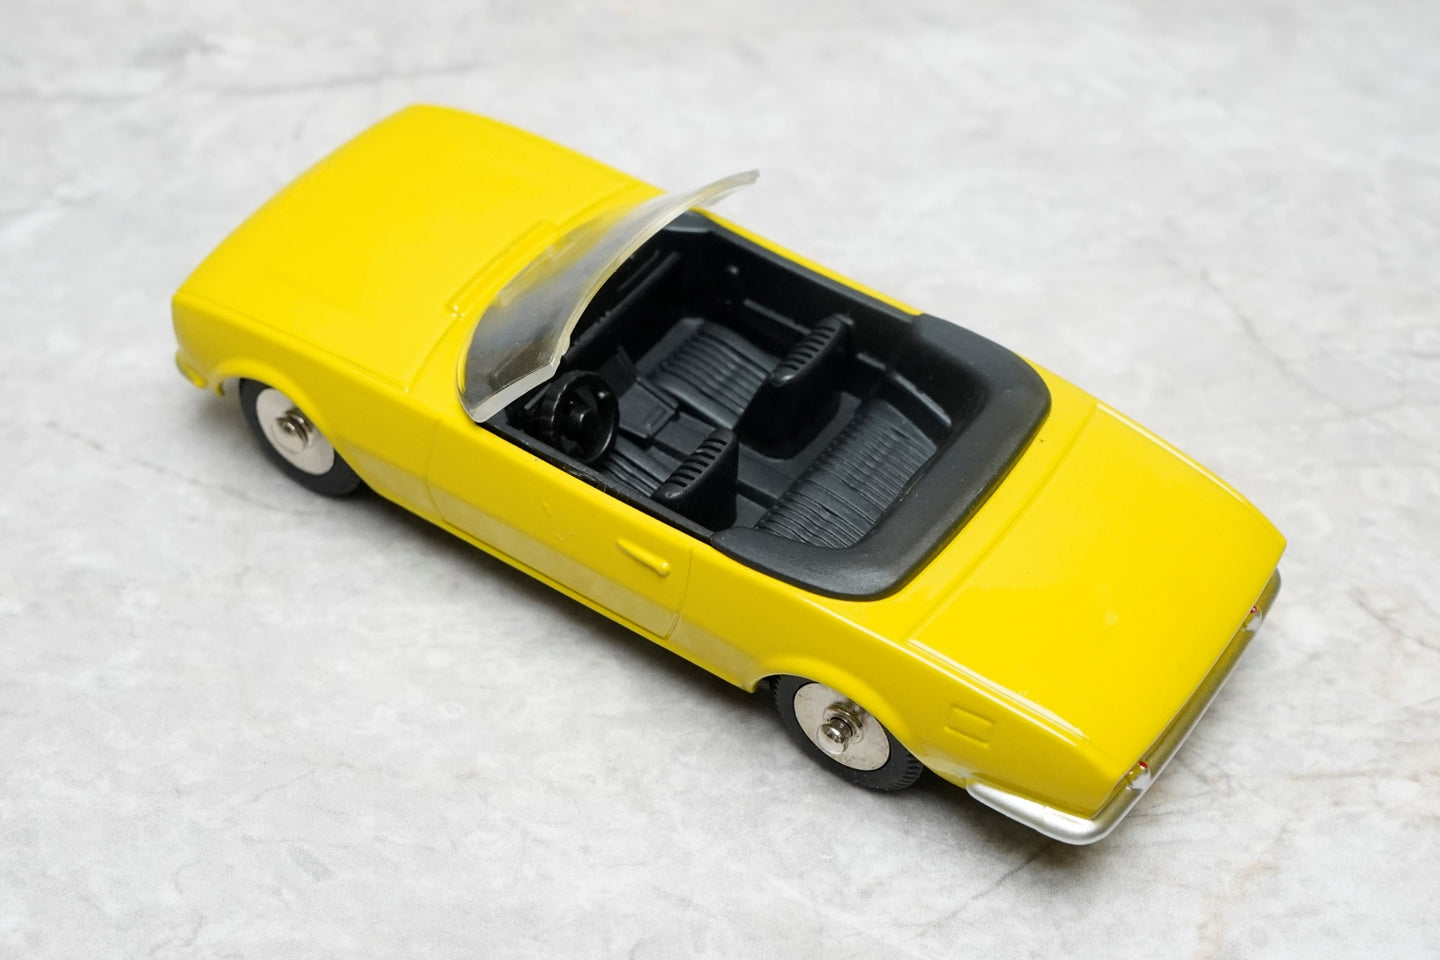 Cabriolet 504 Peugeot Alloy Diecast Car Model 1:43 By DINKY TOYS